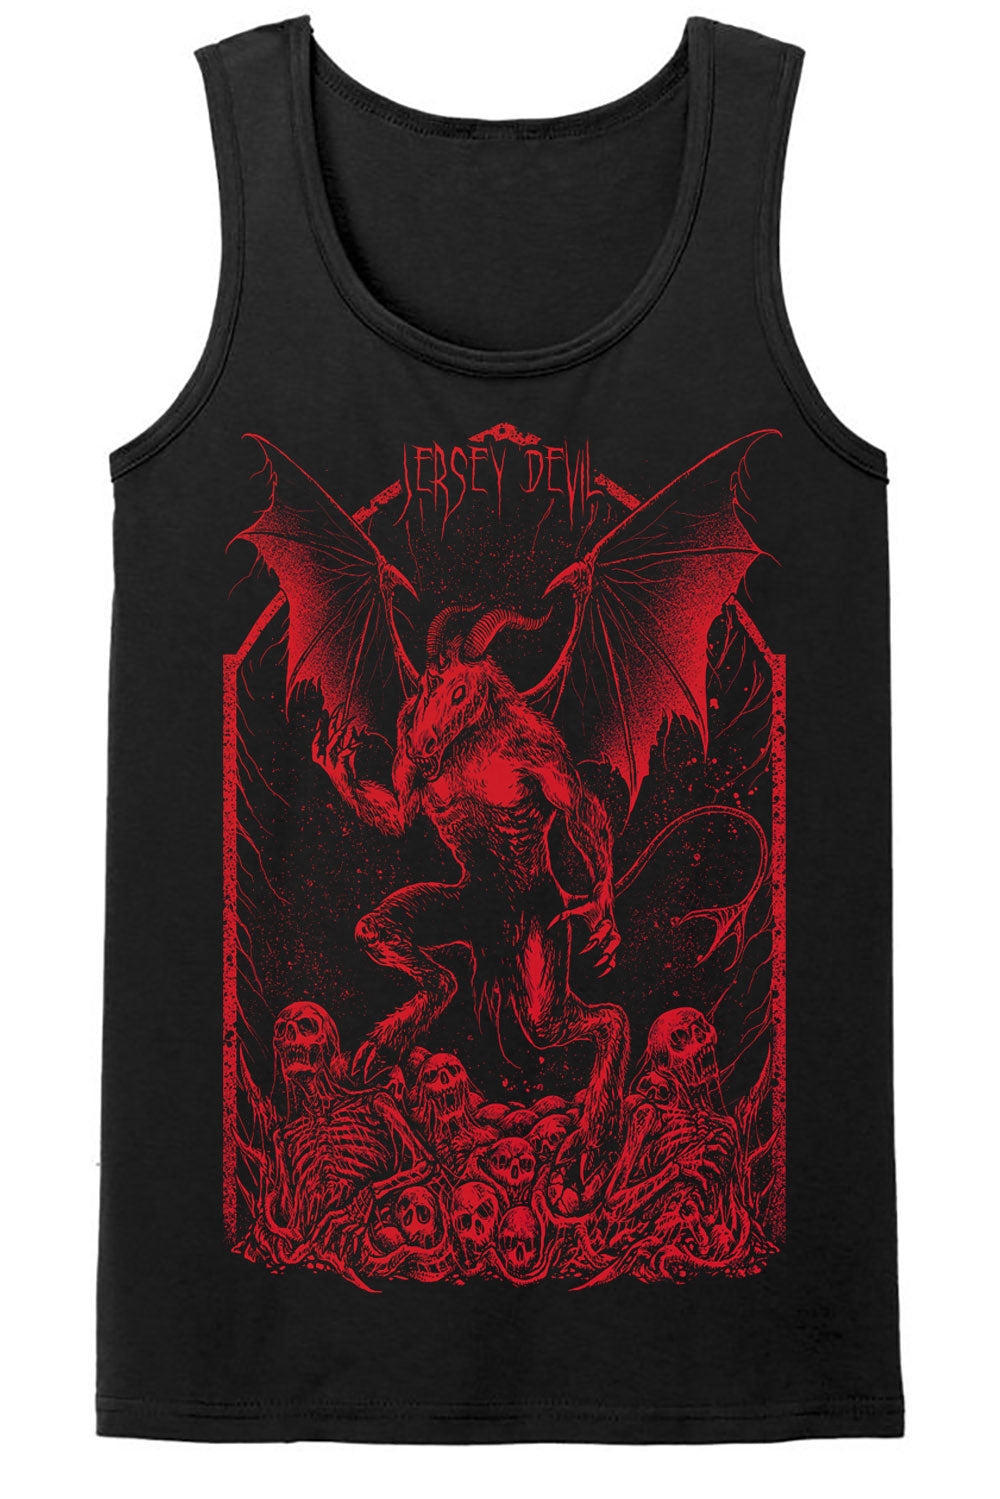 Jersey Devil Tee [Multiple Styles Available]